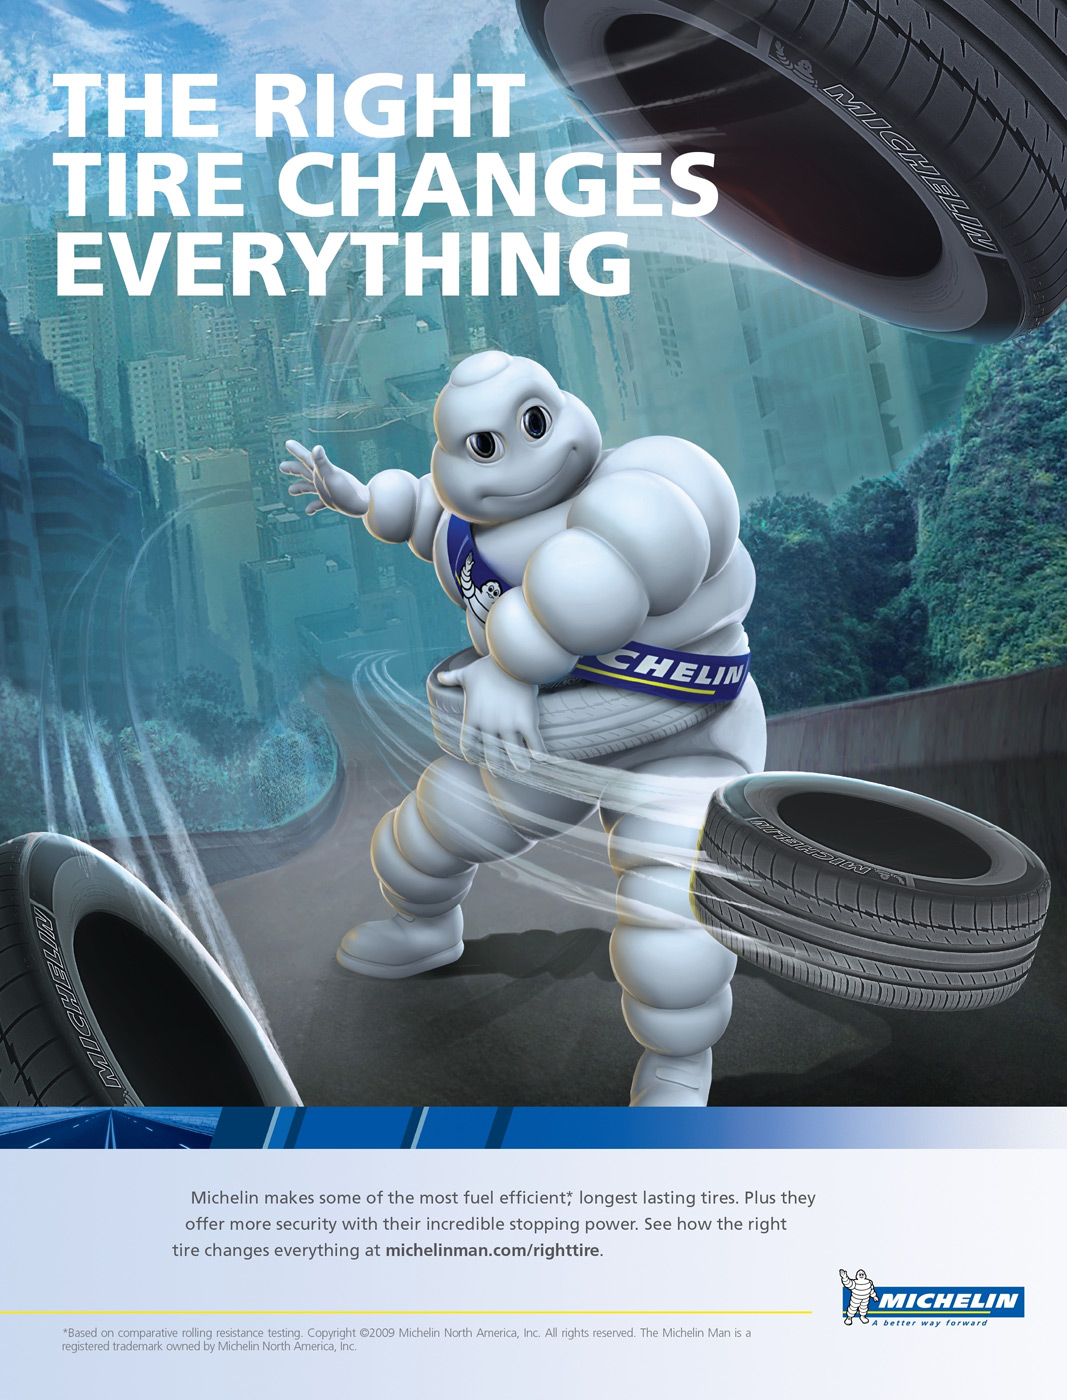 Michelin-Save-on-fuel-Print-Ad-1